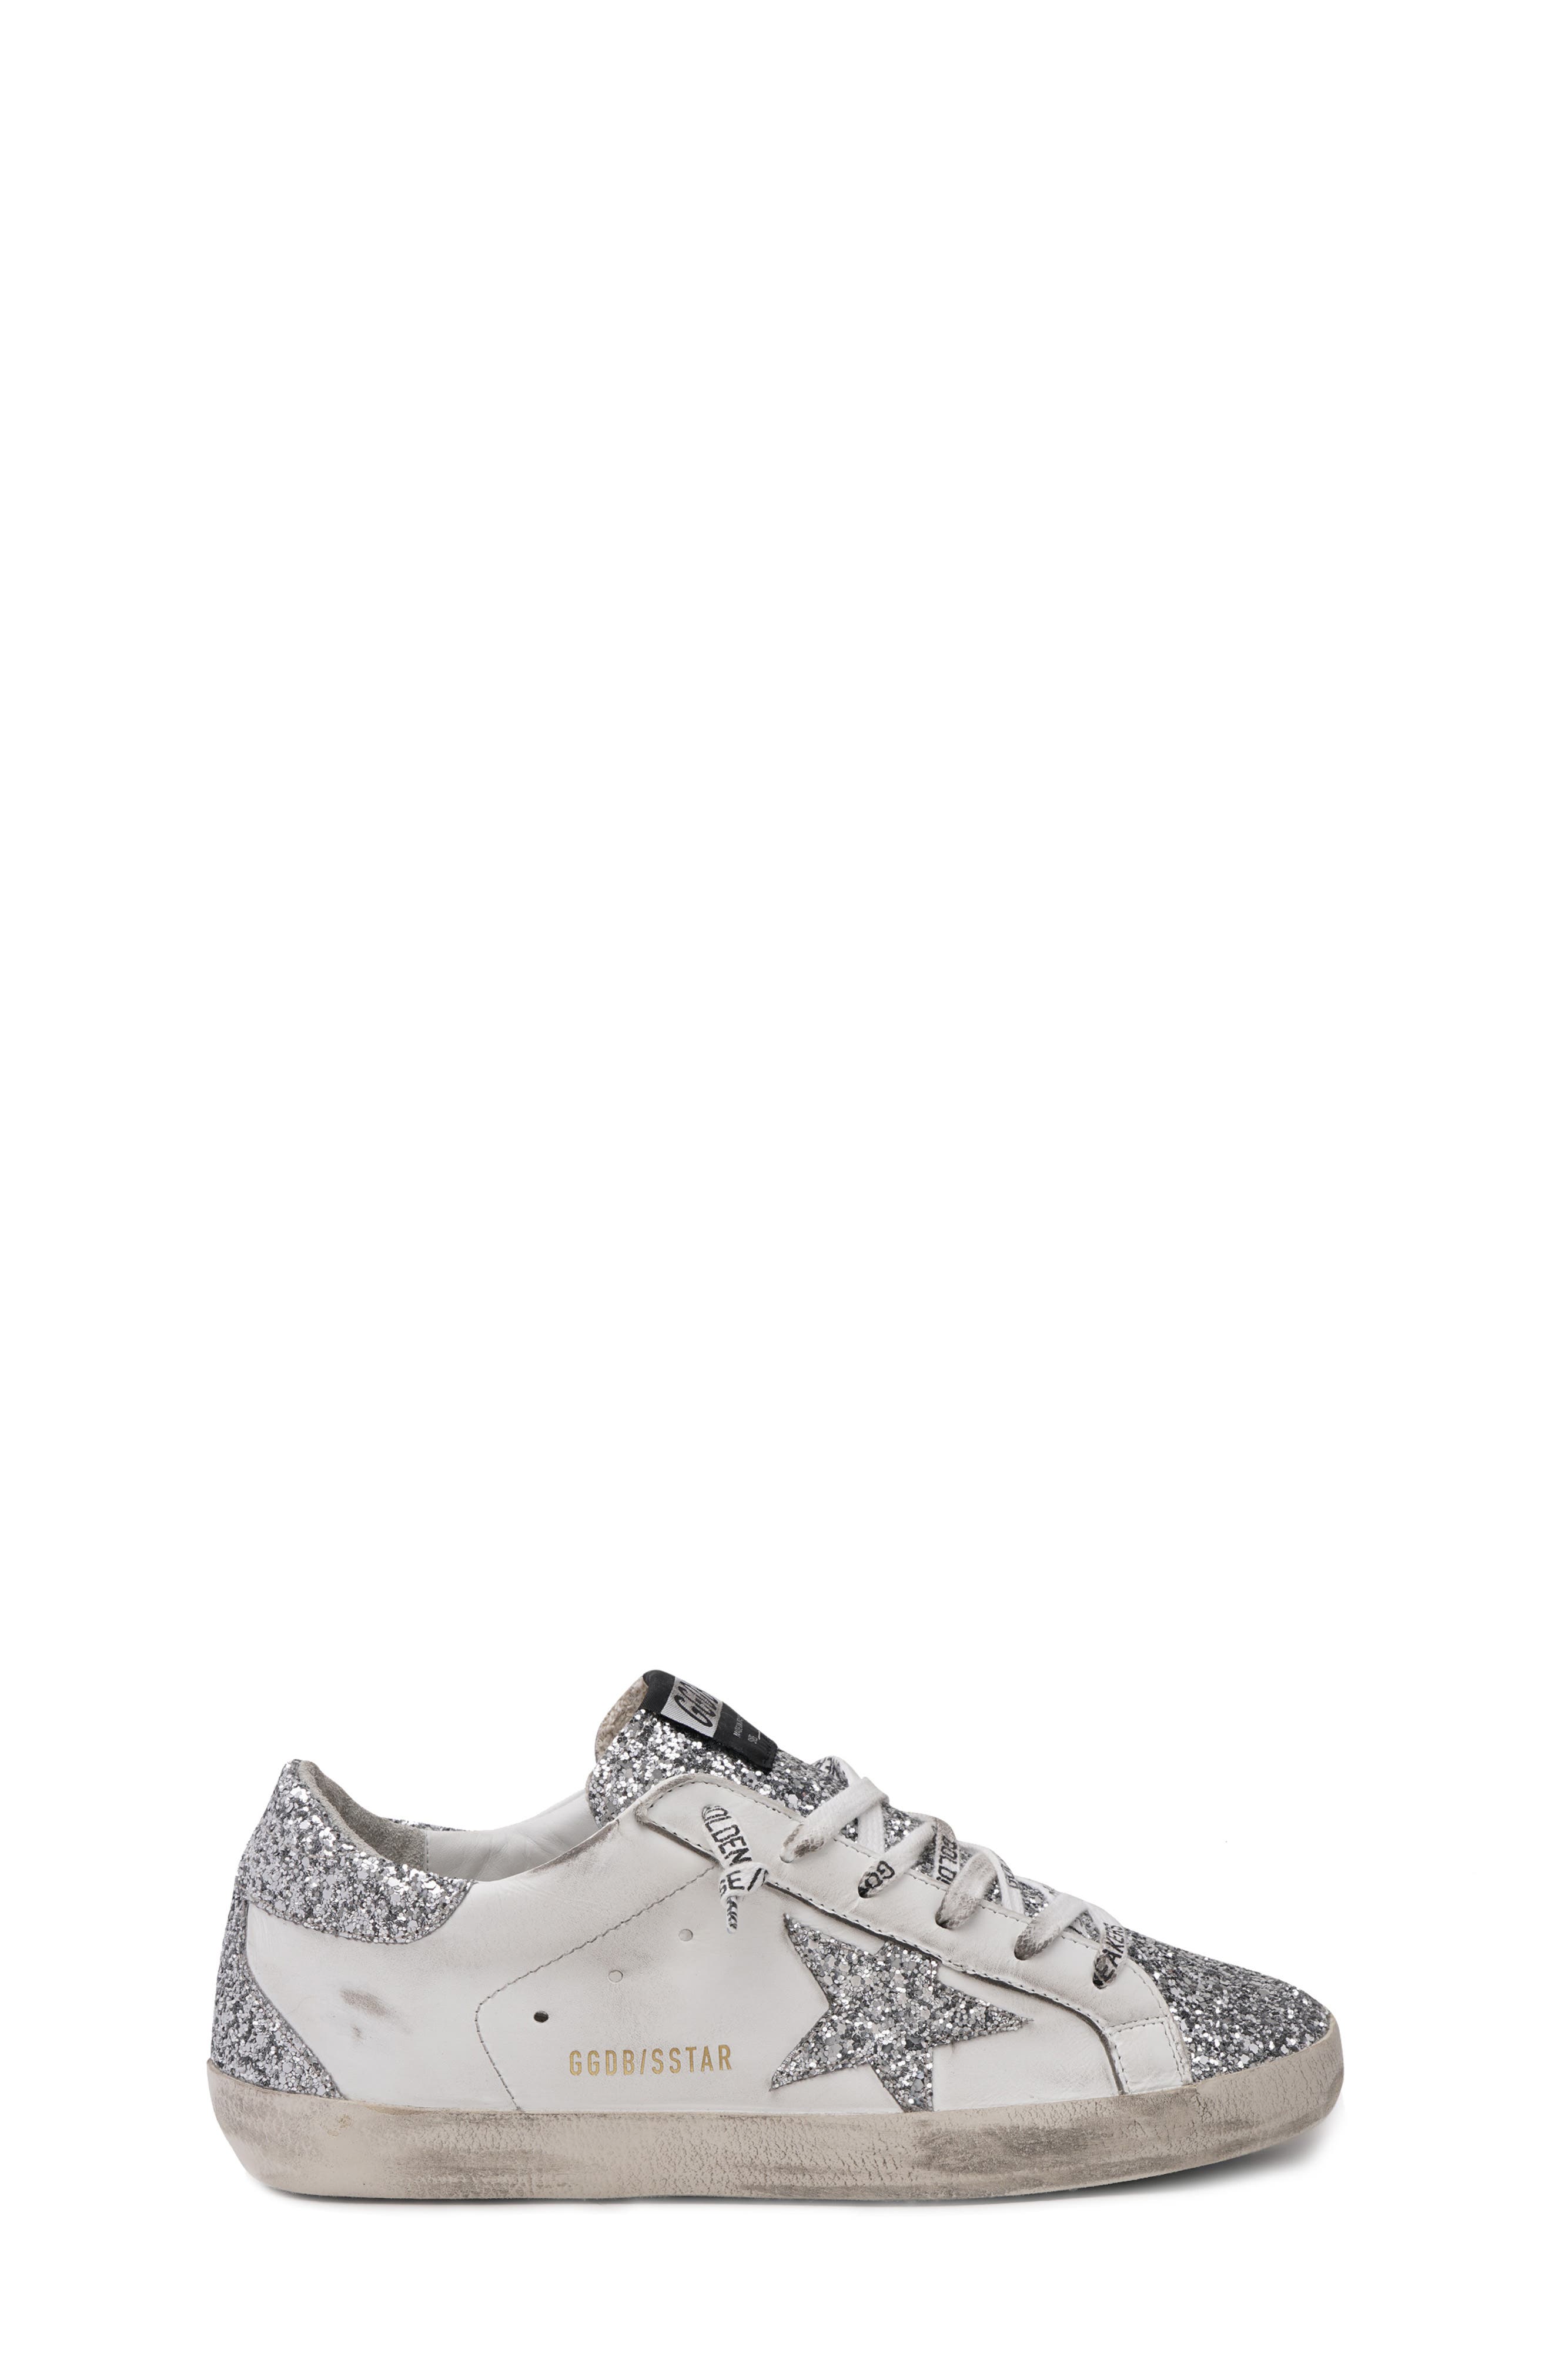 golden goose sneakers sparkly